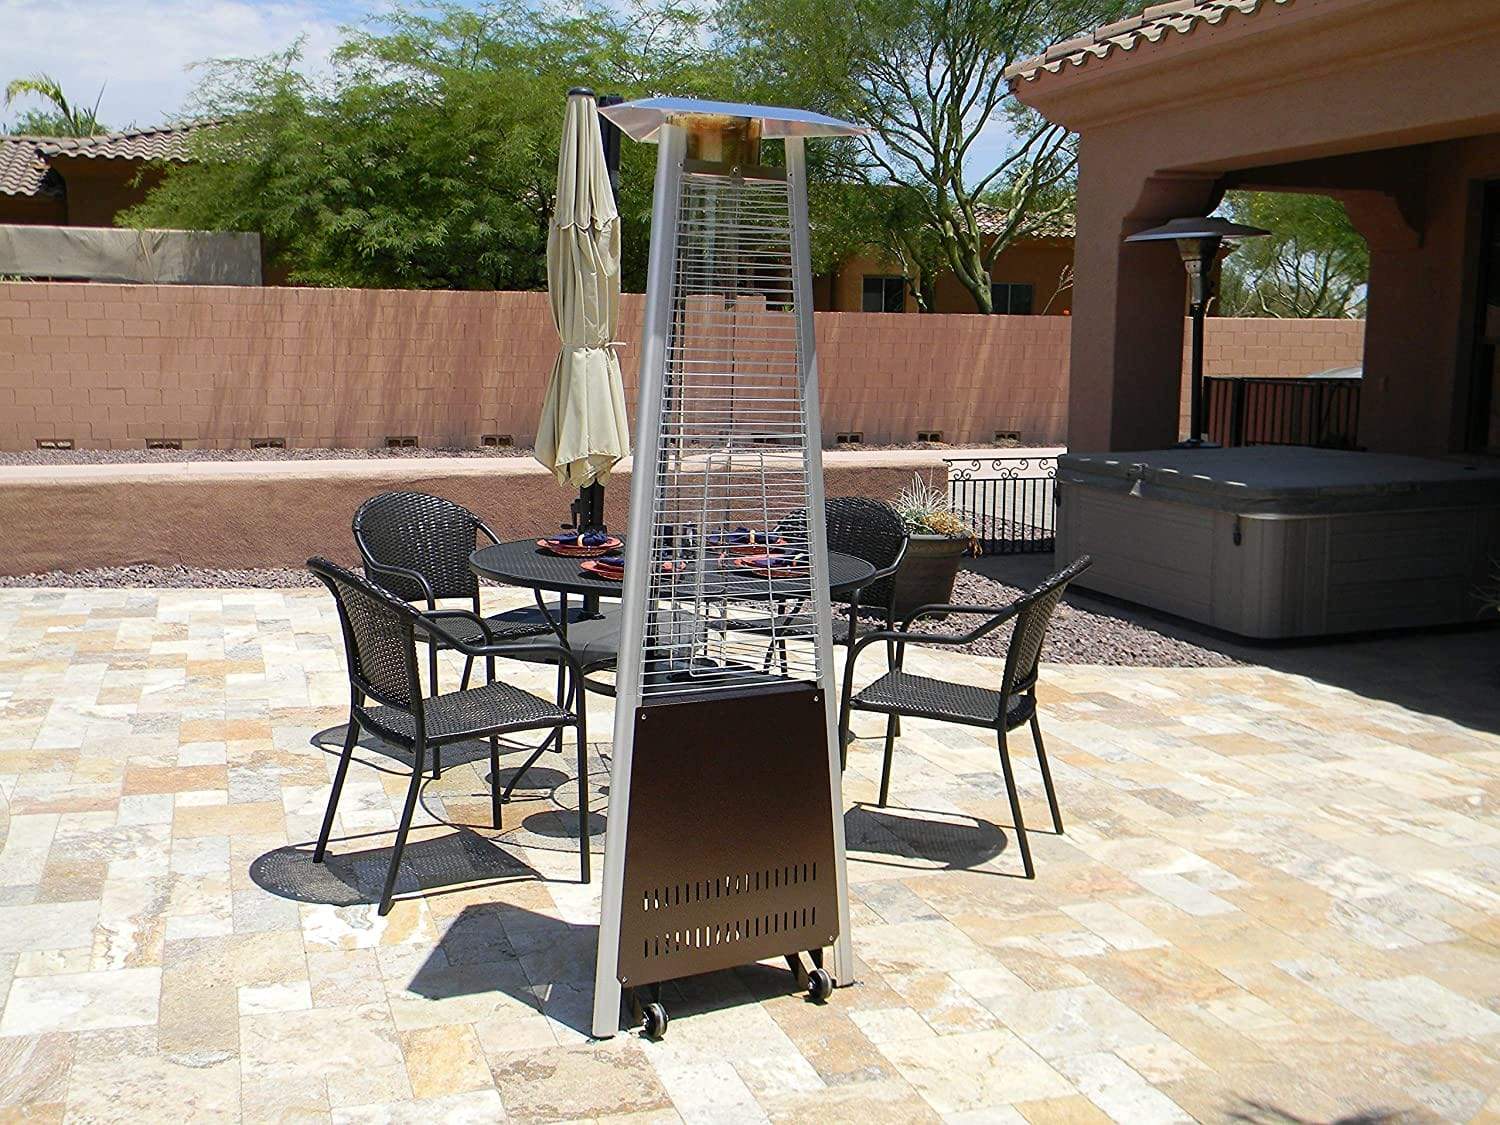 Hiland Tower Patio Heater Patio Heater Hiland Patio Heaters Compact Glass Tube Heater in Hammered Bronze